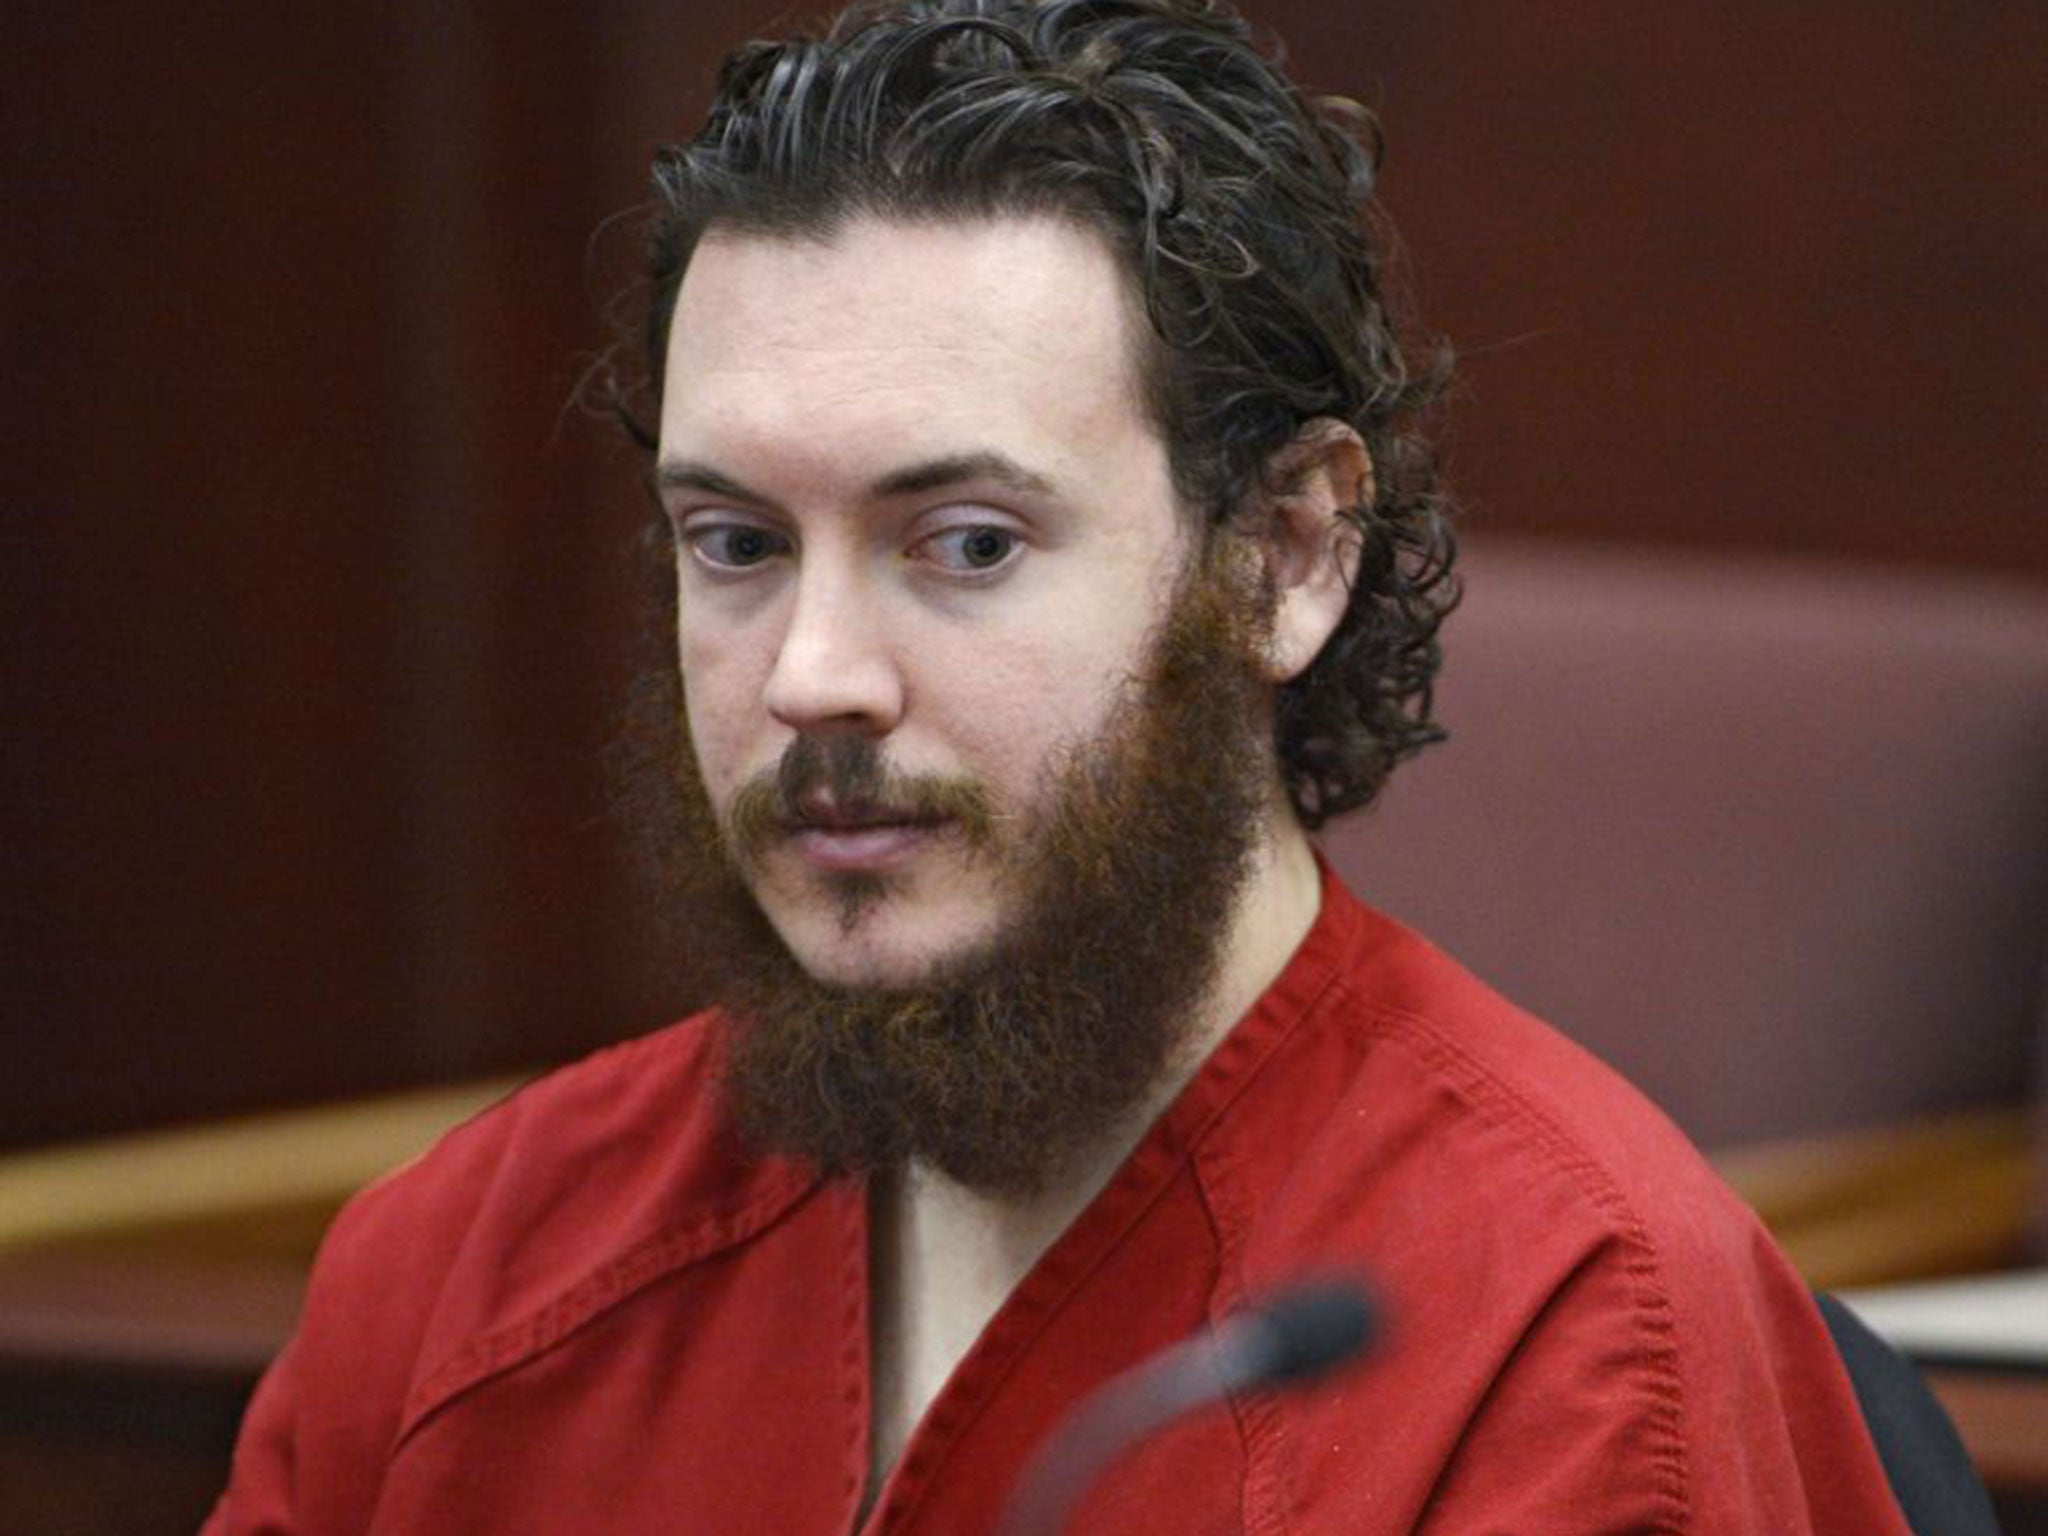 James Holmes, who could face the death penalty, pictured in court in 2013